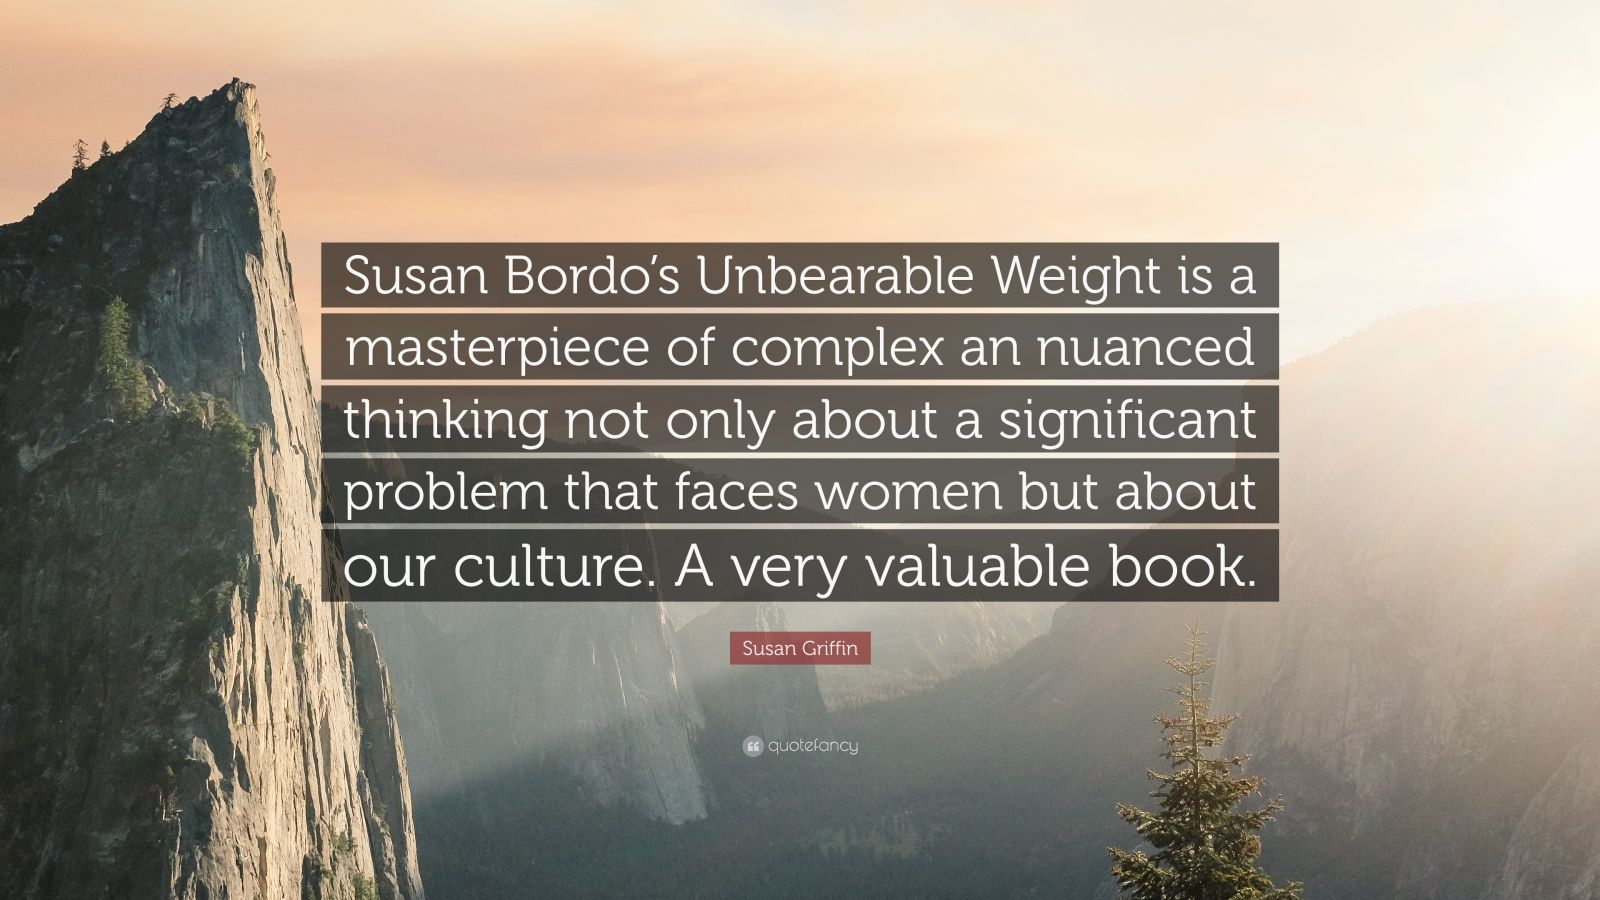 unbearable weight by susan bordo